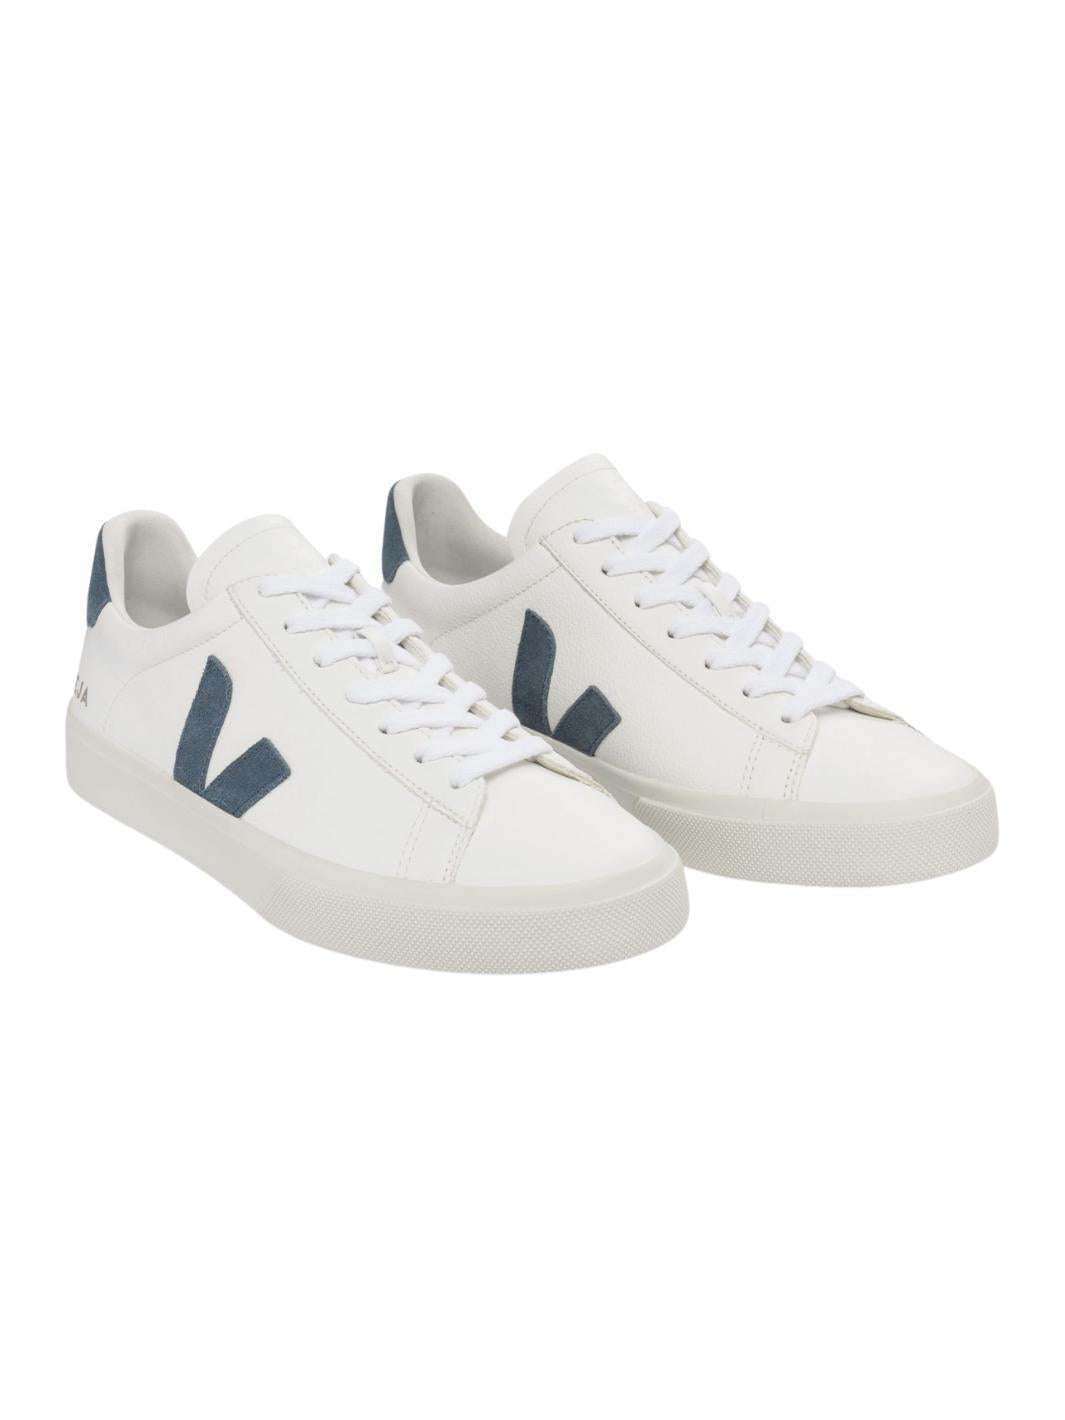 Veja Shoes Sneakers | Campo Chromefree White California Suede